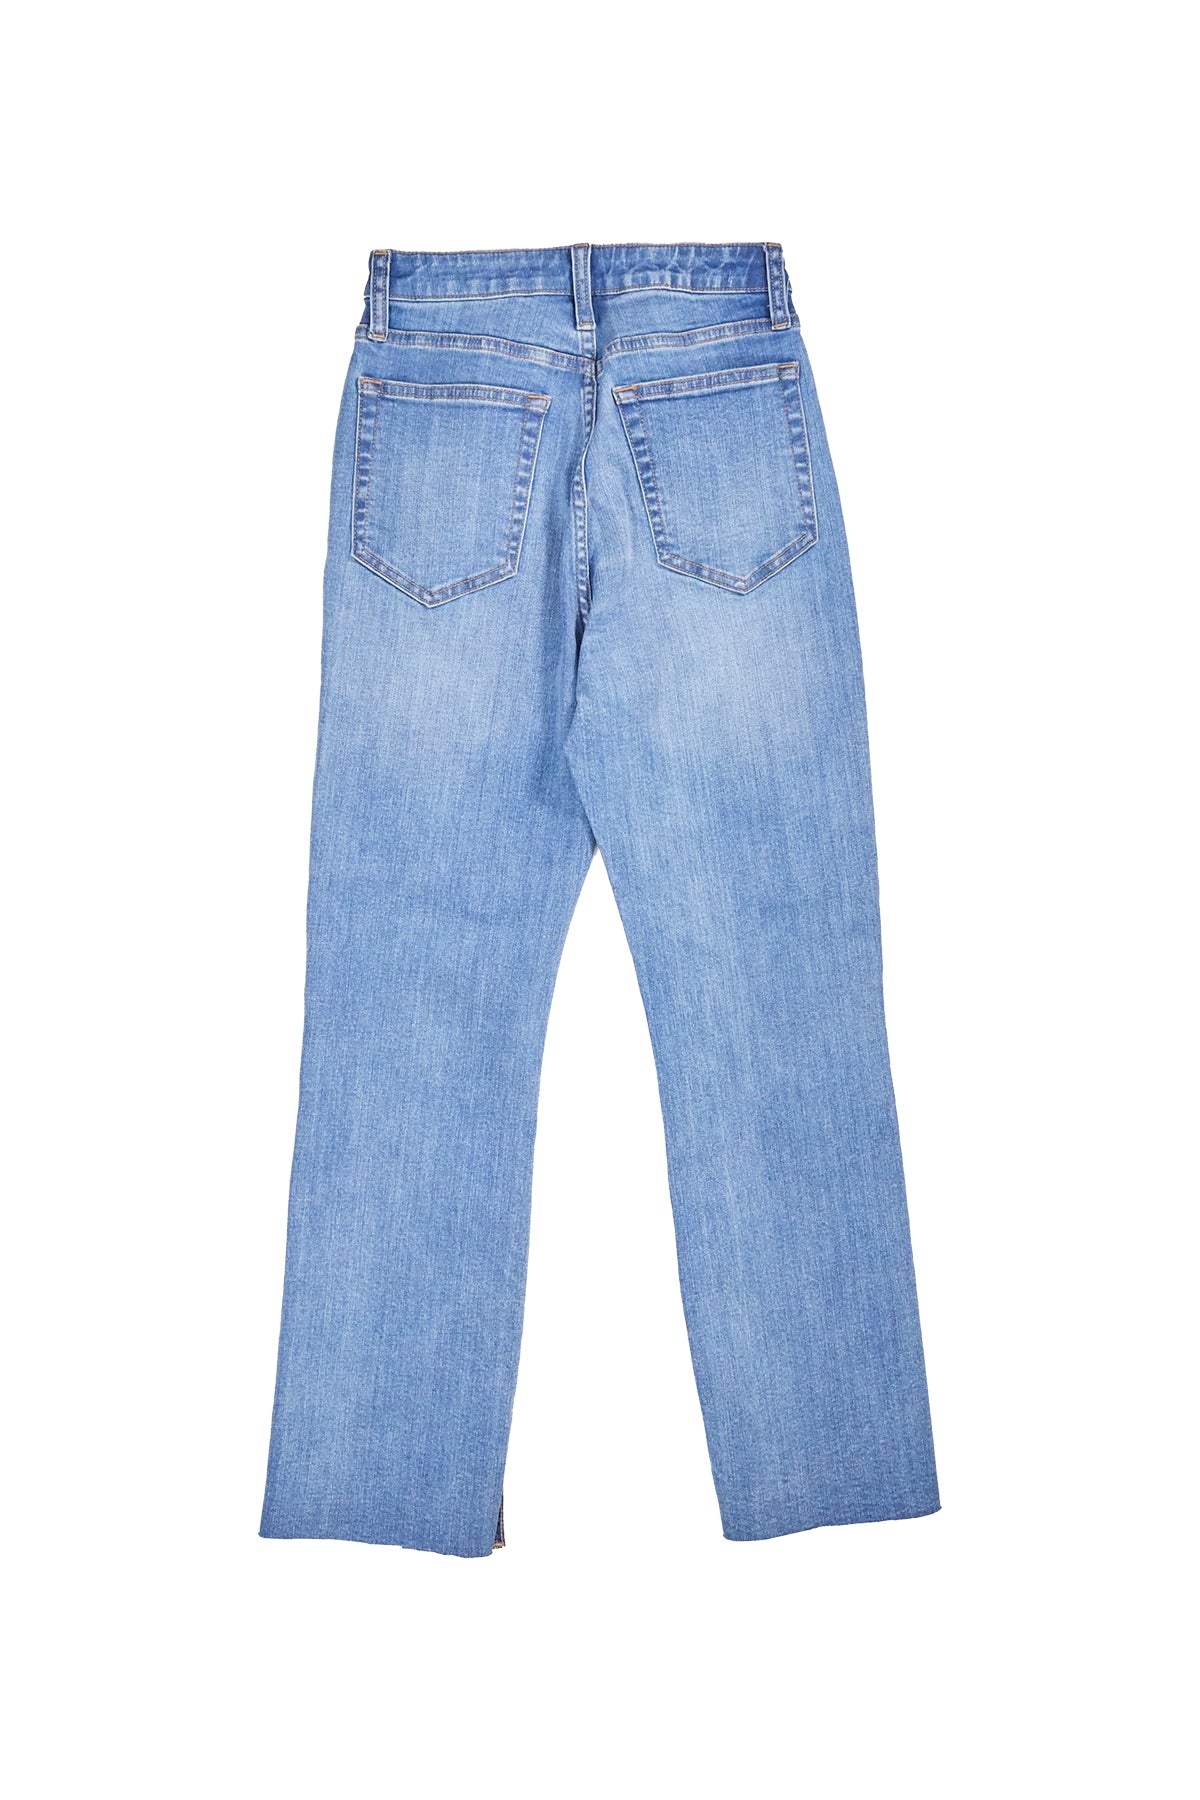 Your Own Daily Denim Pants / Blue